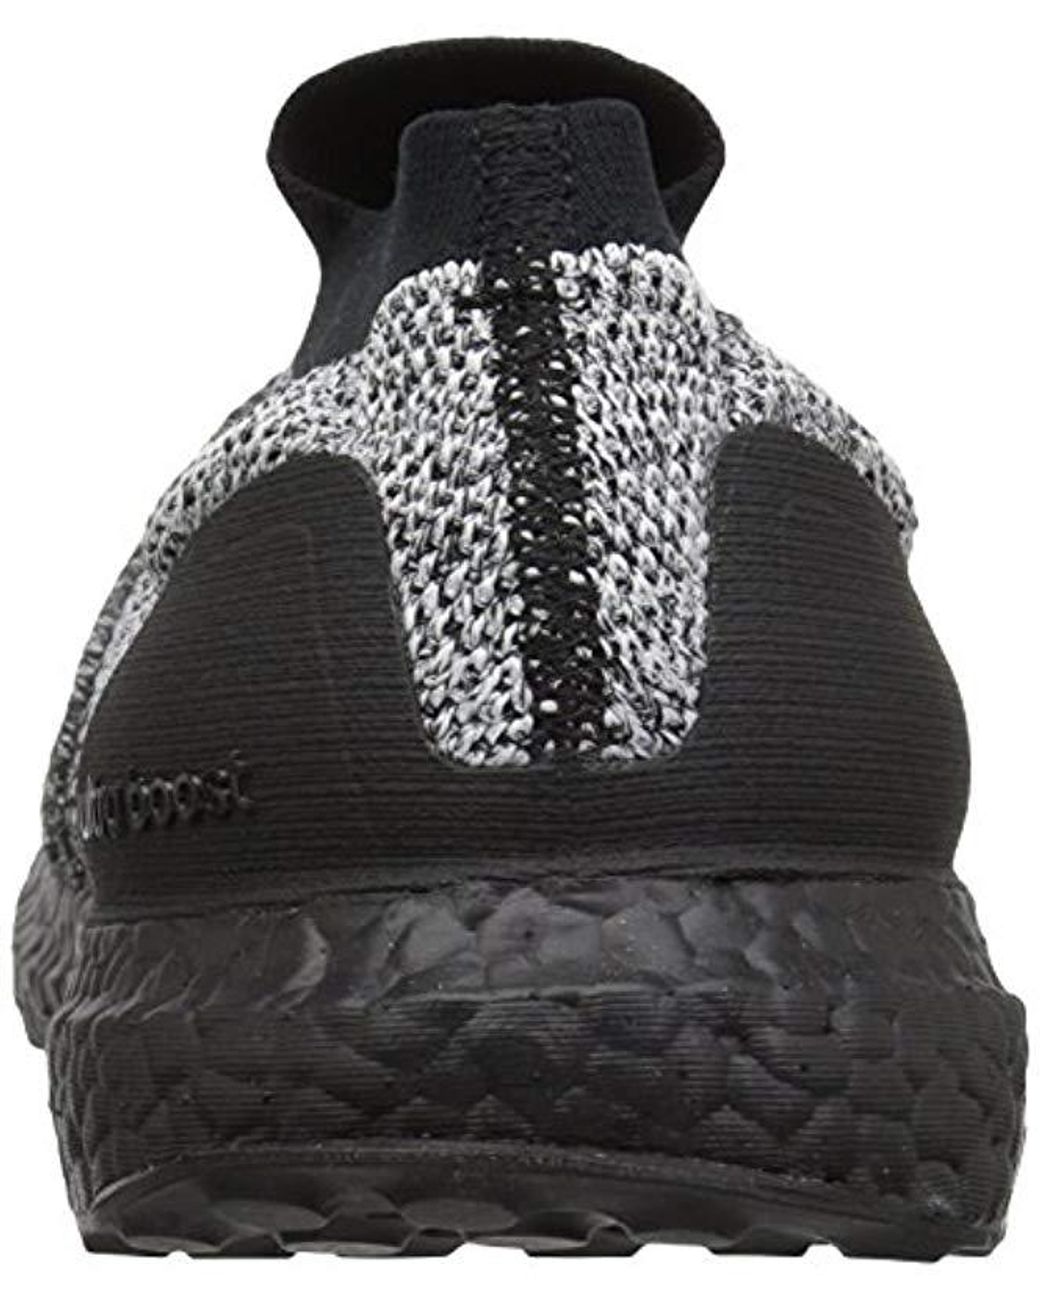 adidas Ultraboost Laceless Shoes - Size 10 in Black/Black/White (Black) for  Men | Lyst